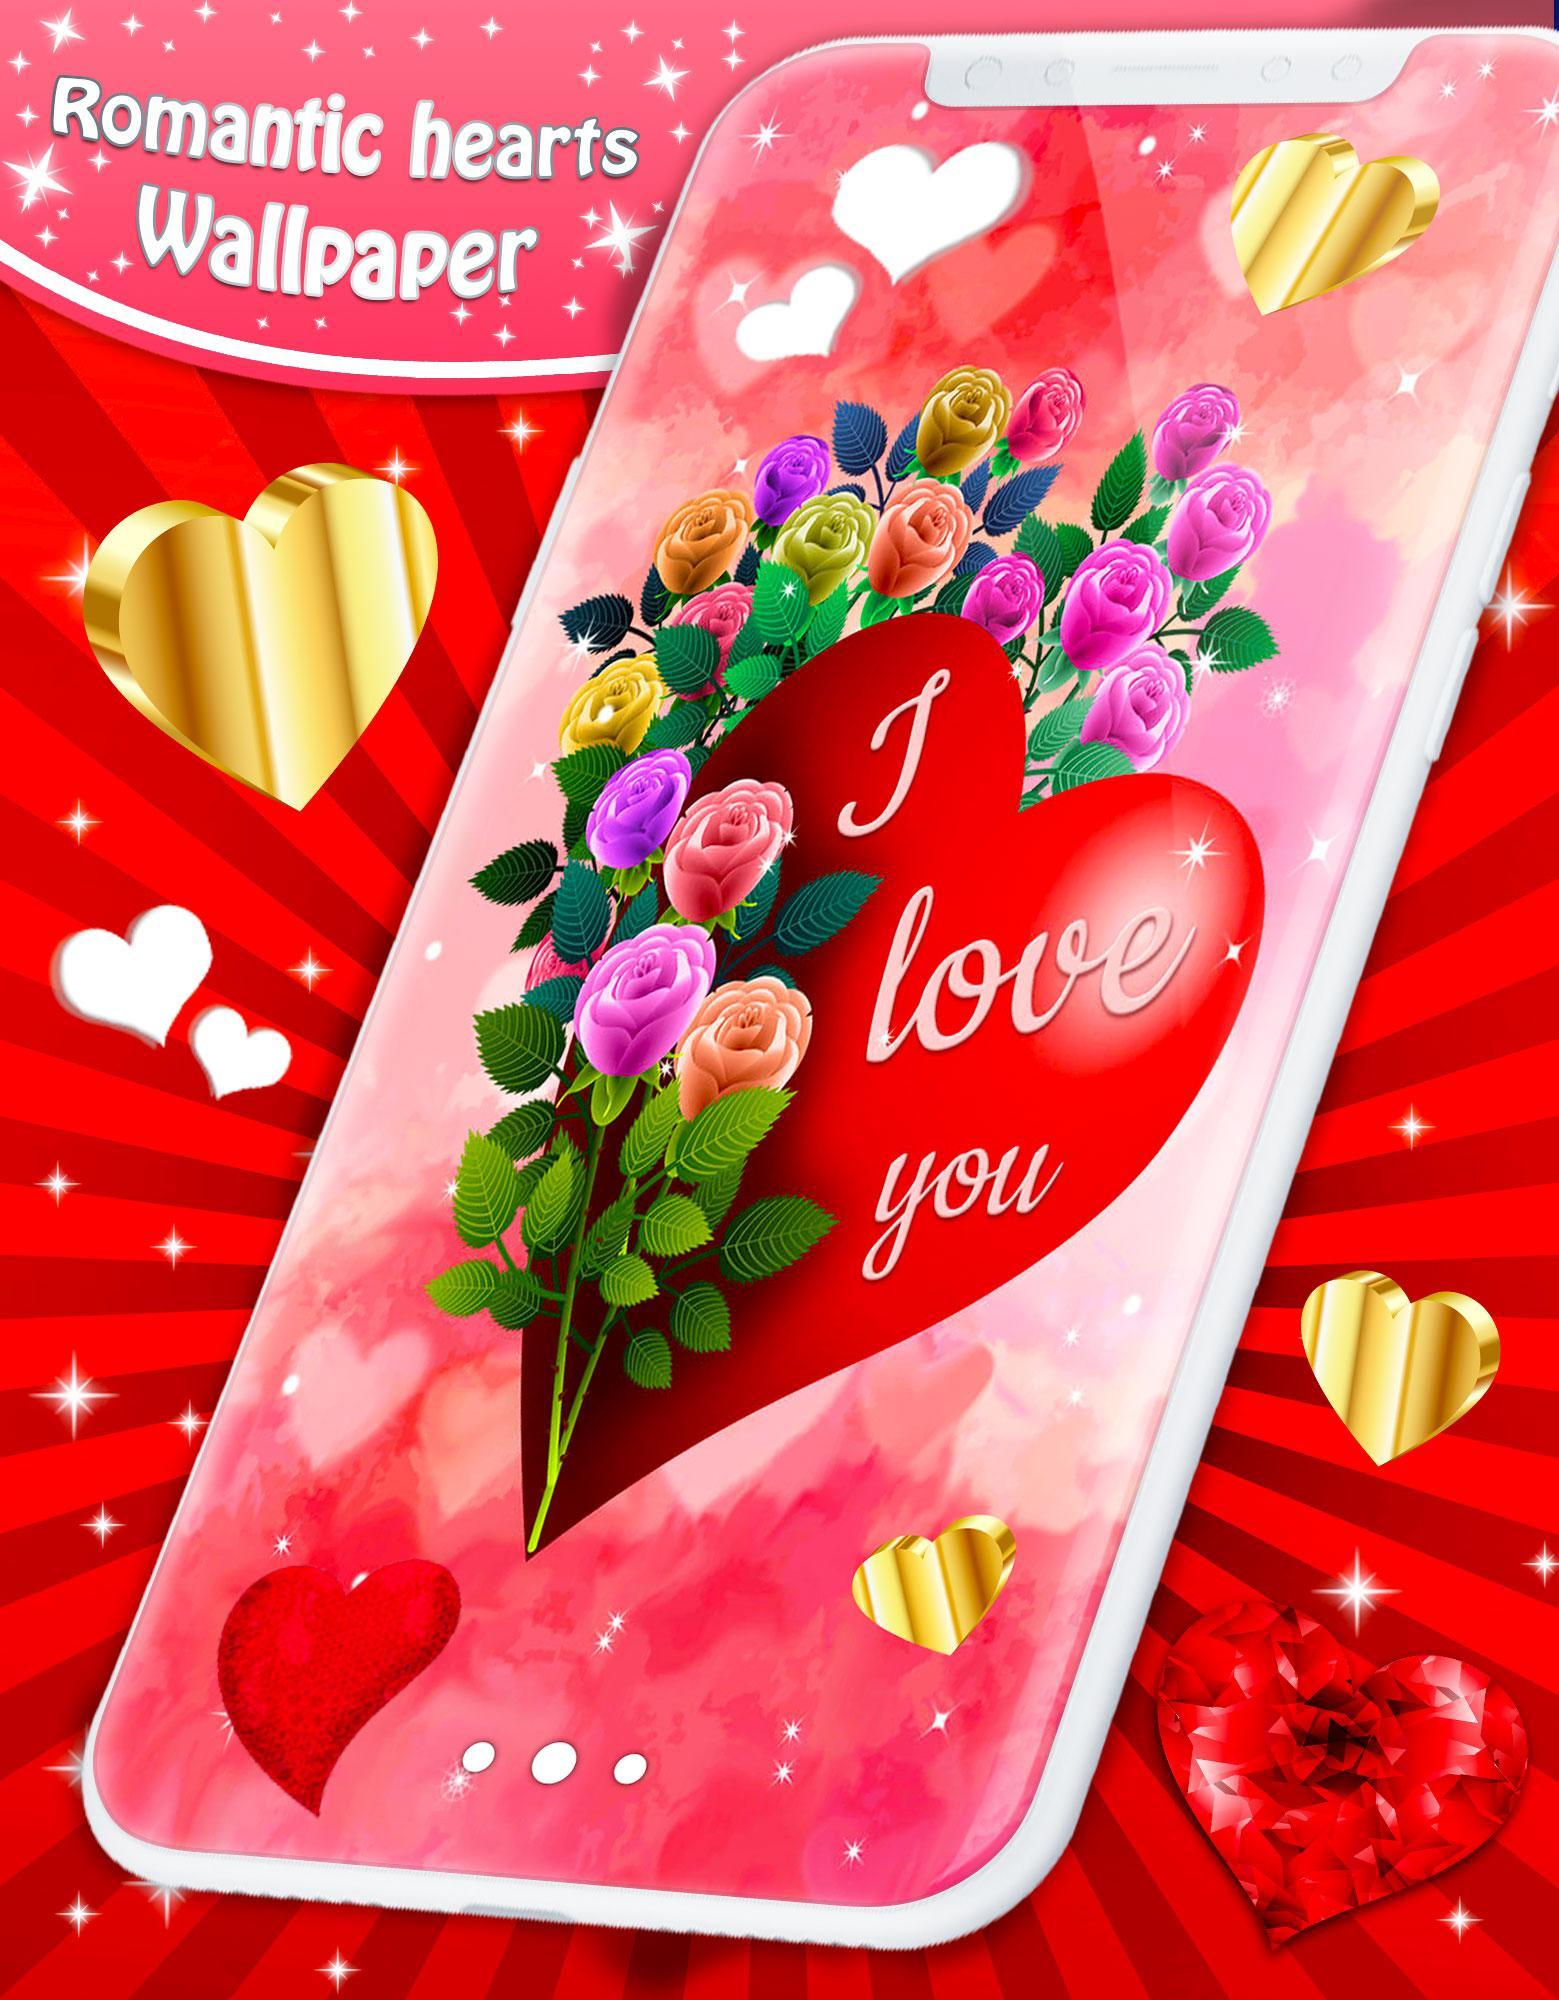 Love Live Wallpaper for Android - APK Download